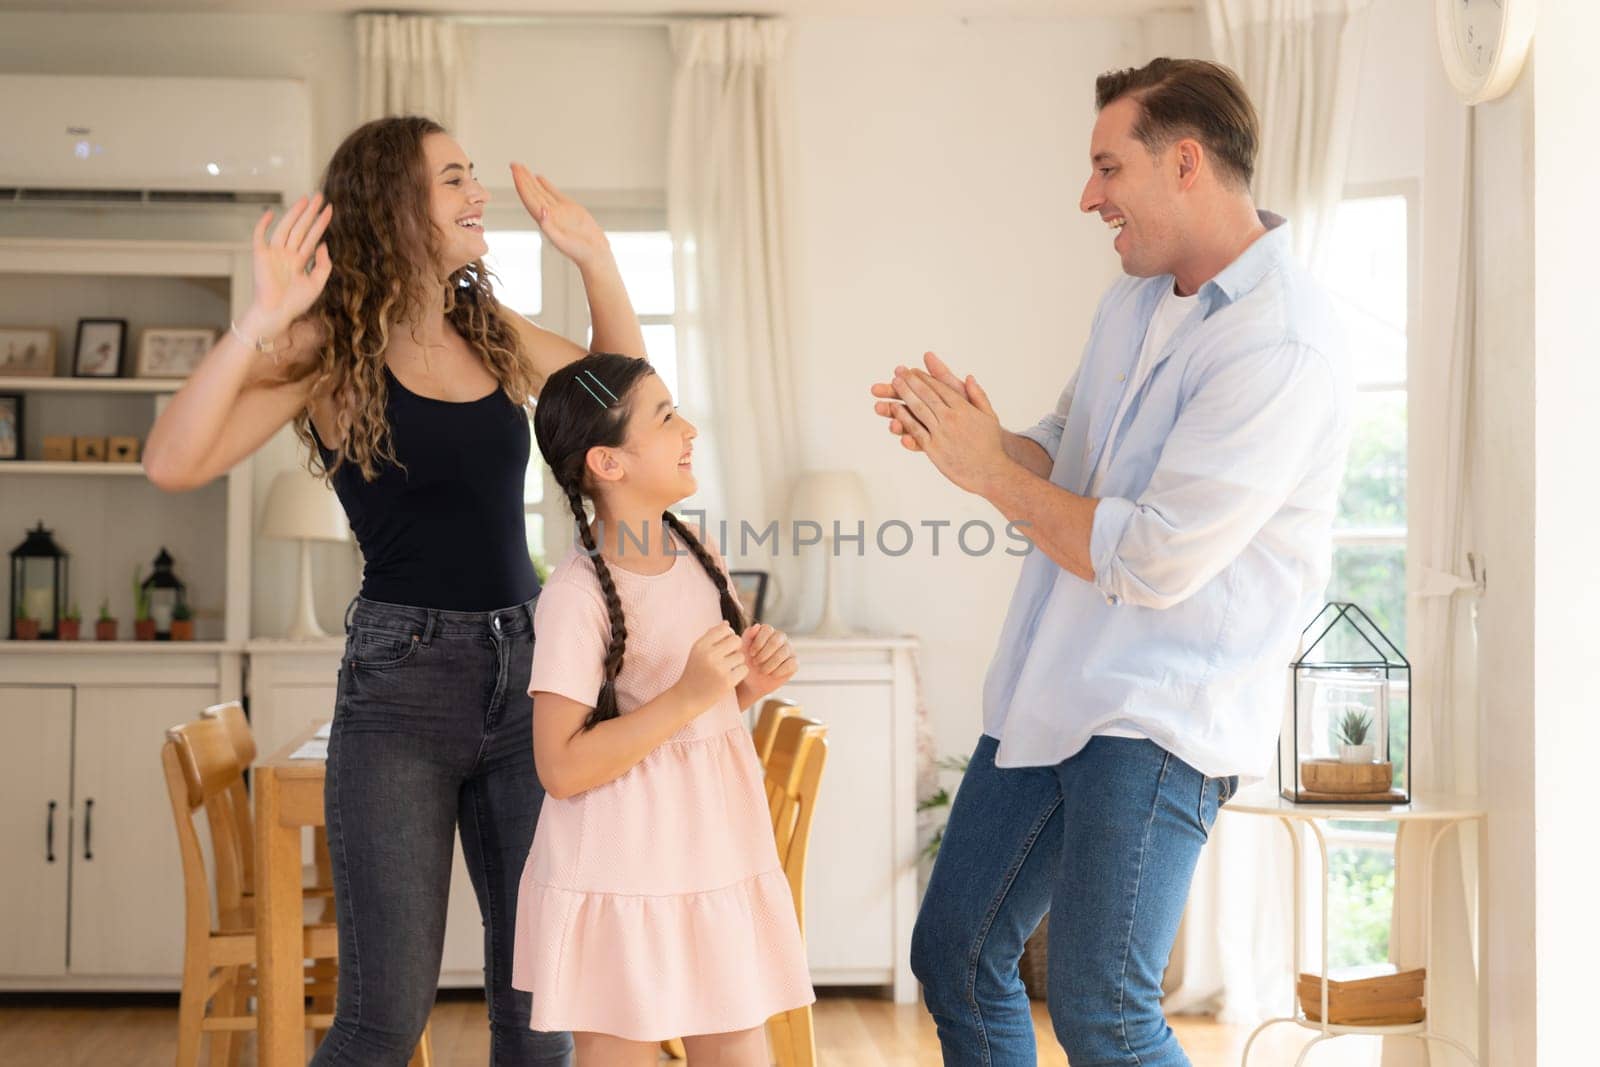 Happy family portrait with lovely little girl smiling and looking at camera, lovely and cheerful parent and their daughter sitting together in living room at home with warm daylight. Synchronos